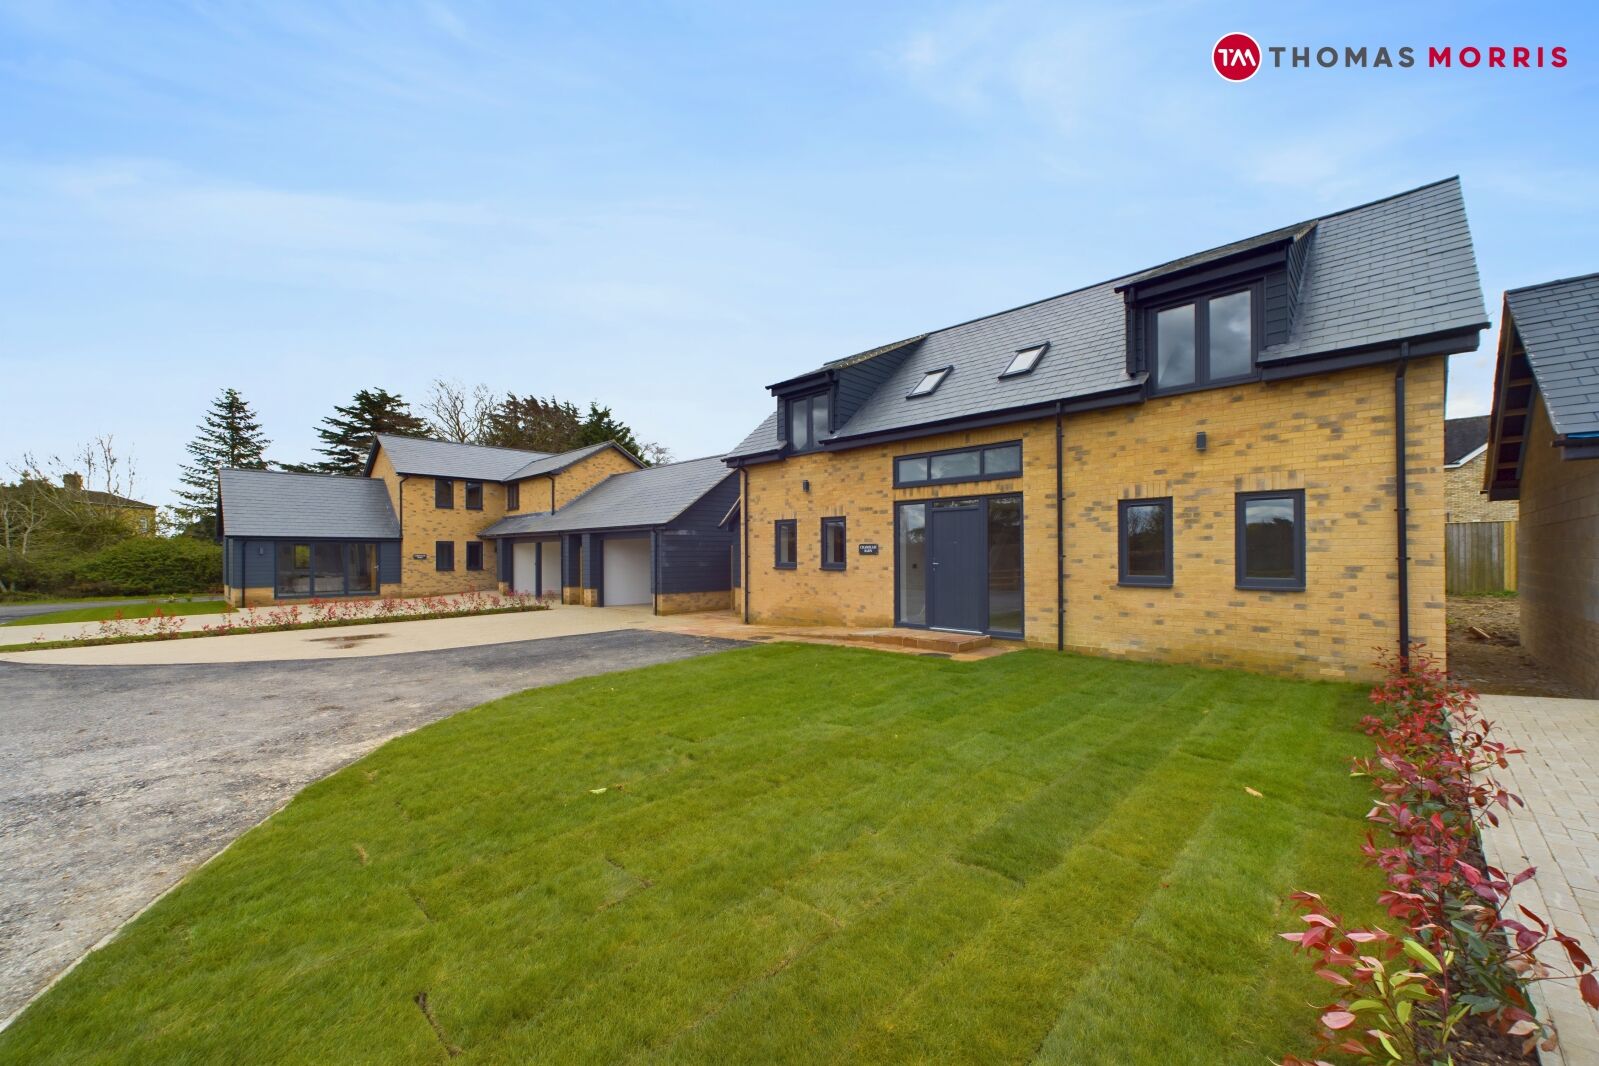 4 bedroom detached house for sale Bluntisham Road, Colne, PE28, main image